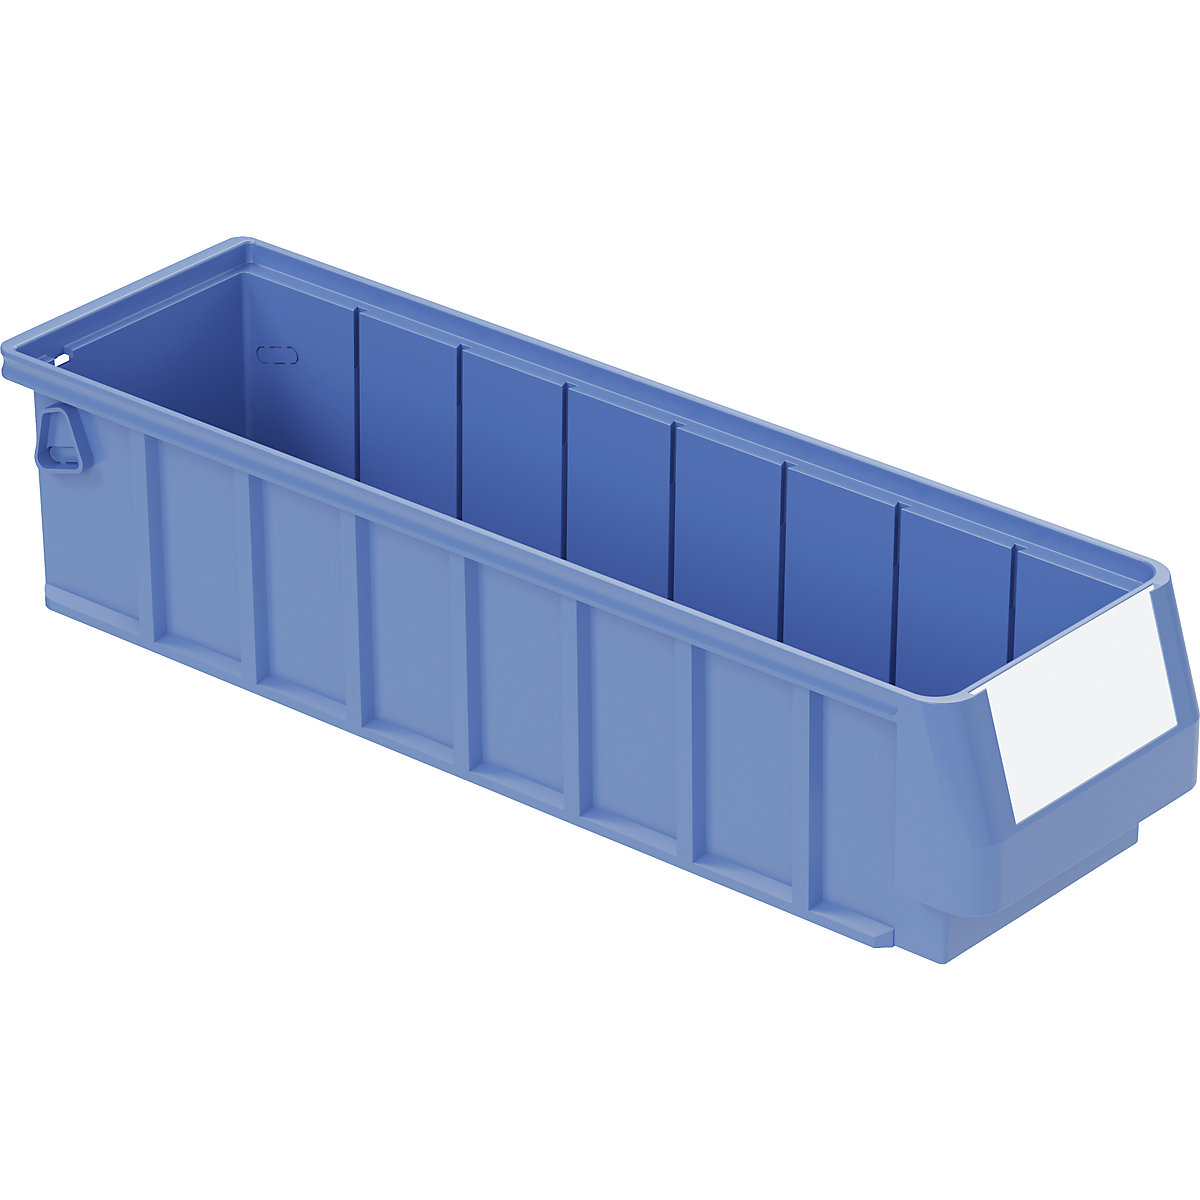 Shelf bin – BITO, made of PP, LxWxH 400 x 117 x 90 mm, pack of 16-14